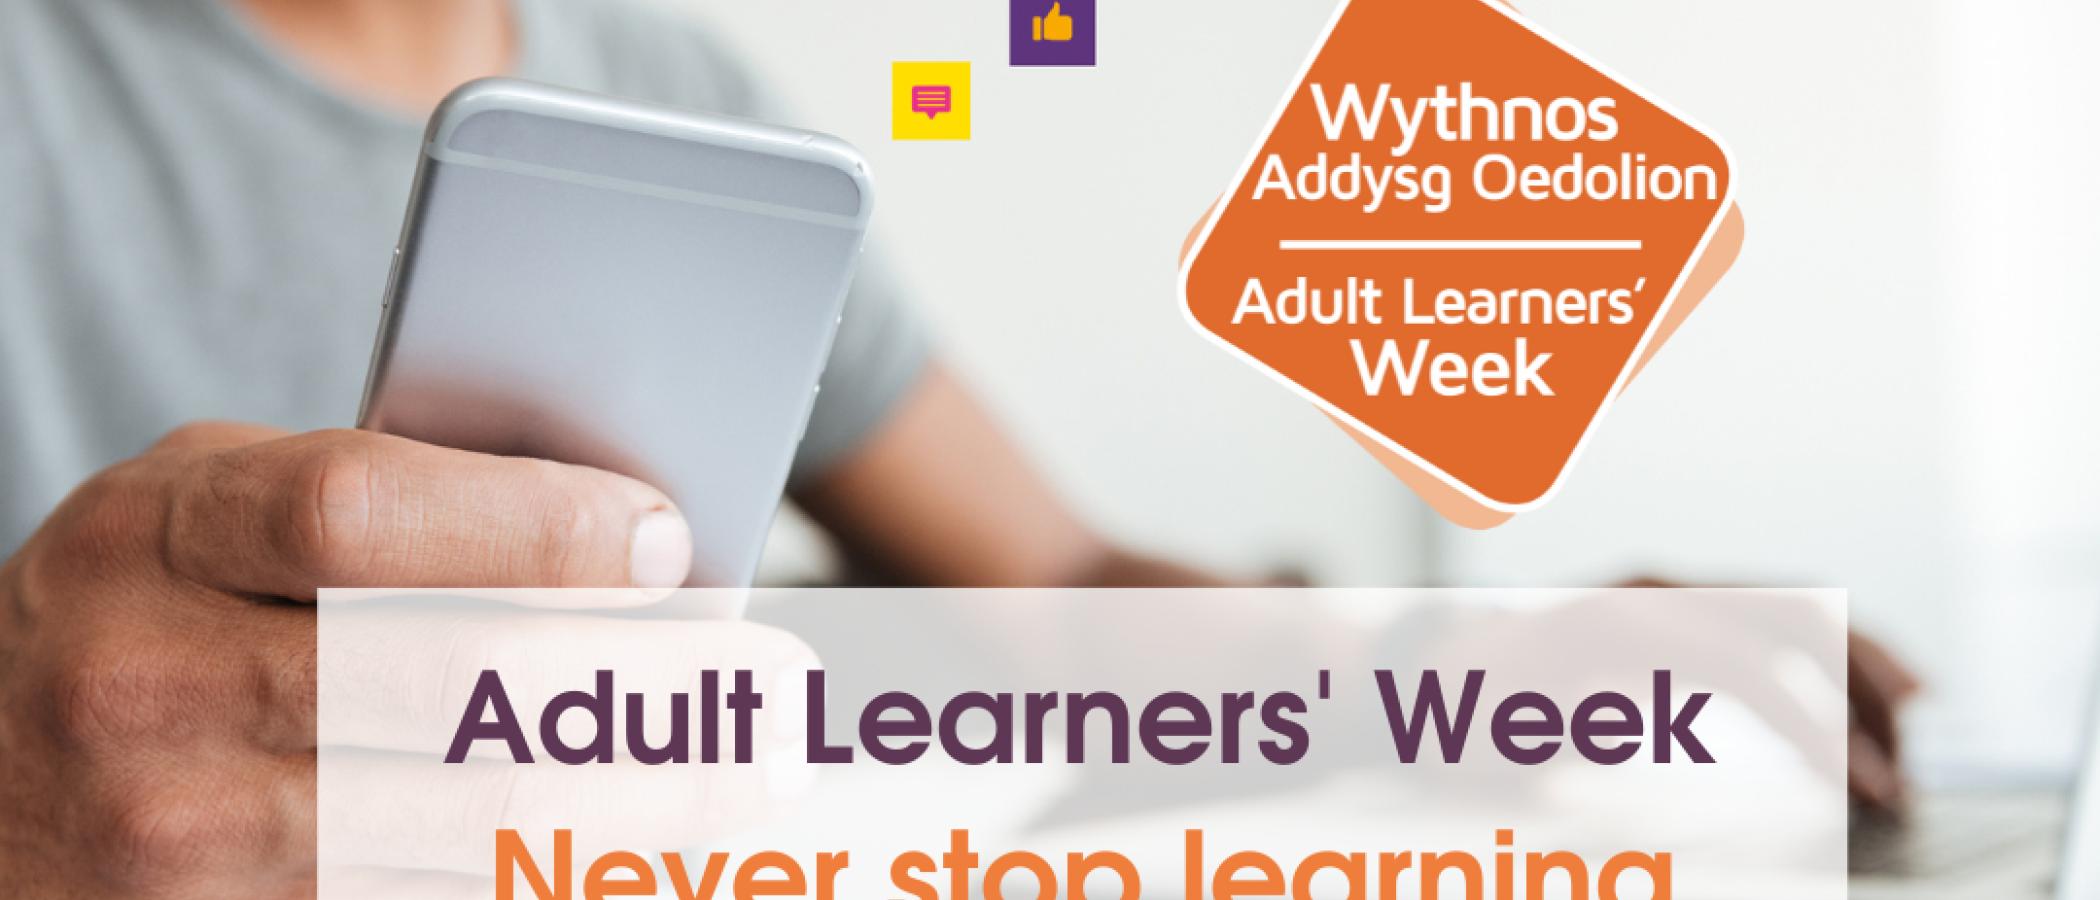 "Adult Learners' Week - Never stop learning" graphic including person smiling at their phone, the ALW and associated logos (Welsh Government, Learning and Work Institute, Careers Wales and Working Wales), and #neverstoplearning and #adultlearnersweek hashtags